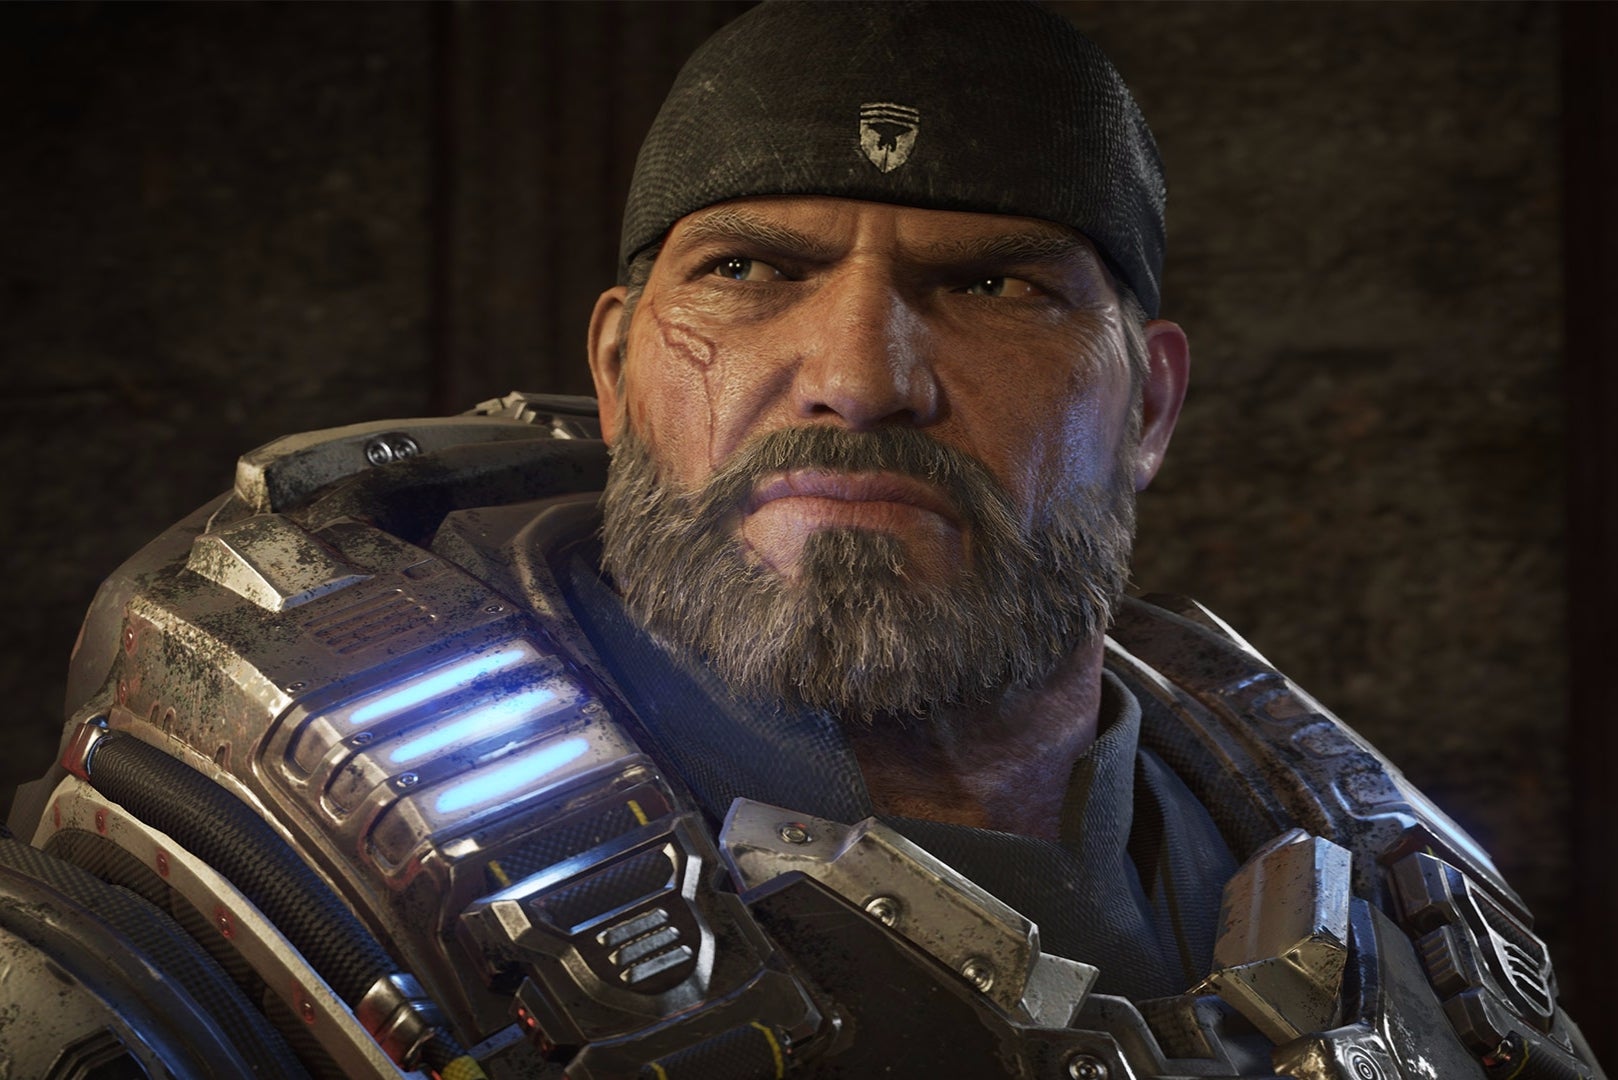 Image for Gears of War 4 campaign runs at 60fps on Xbox One X